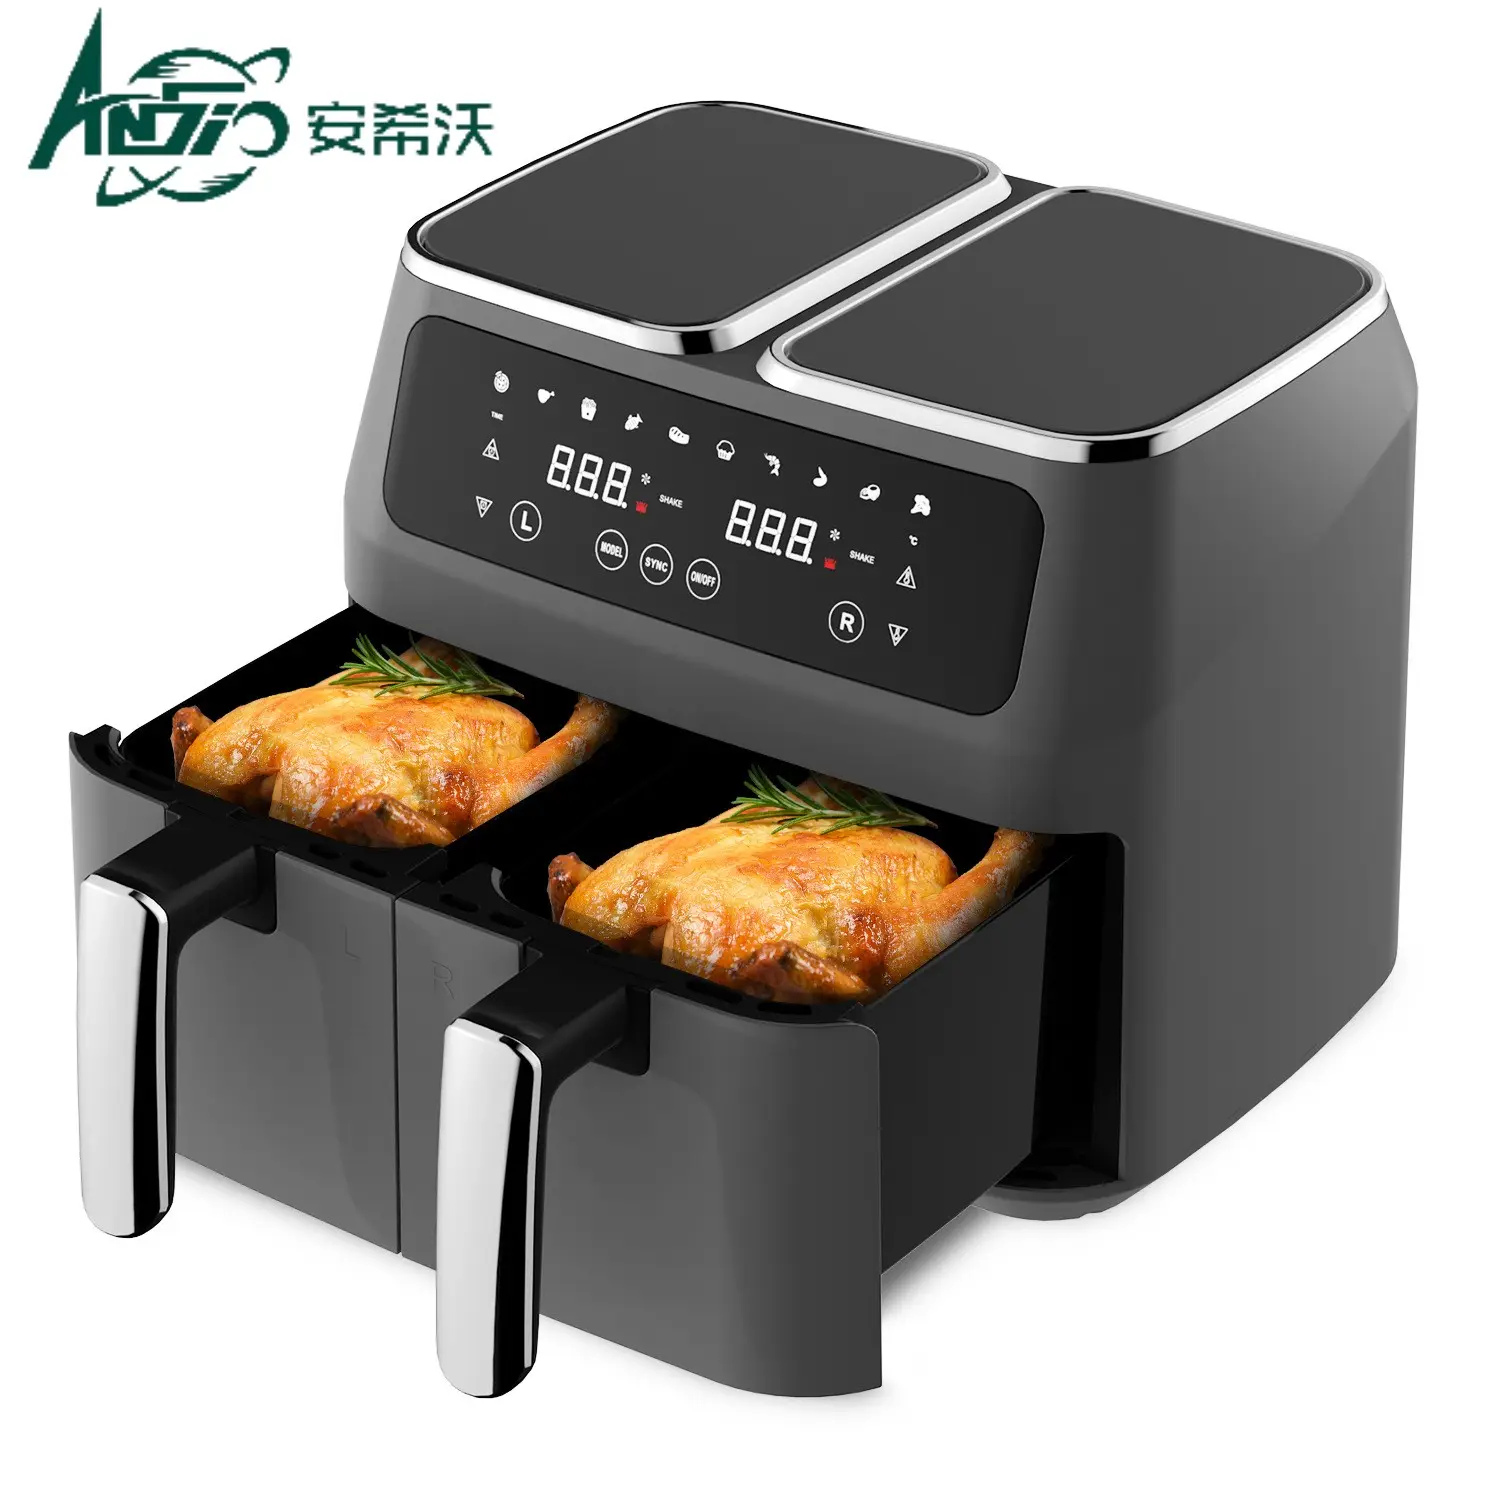 6-in-1 DualZone Technology, 2-Basket Air Fryers with 2 Independent Frying Baskets, Touchscreen, Match Cook & Sync Finis